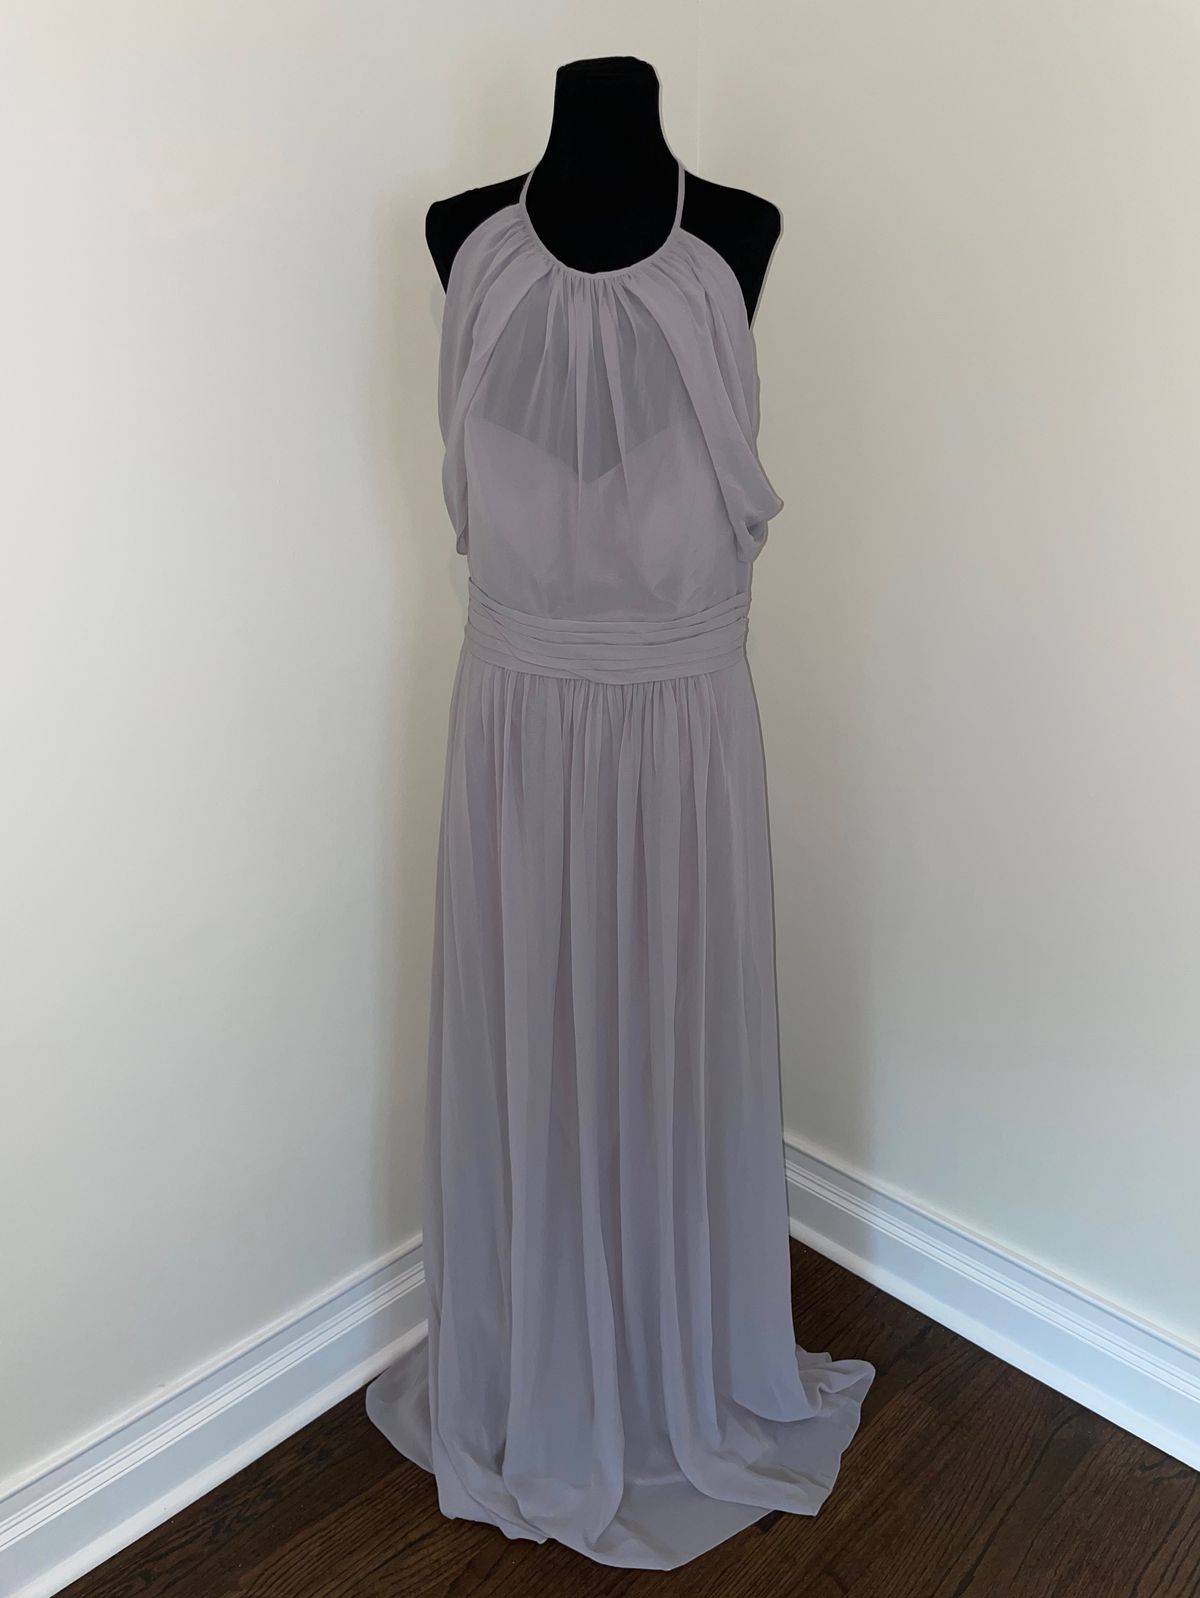 Style B203056 Jasmine Plus Size 16 Bridesmaid Off The Shoulder Purple A-line Dress on Queenly